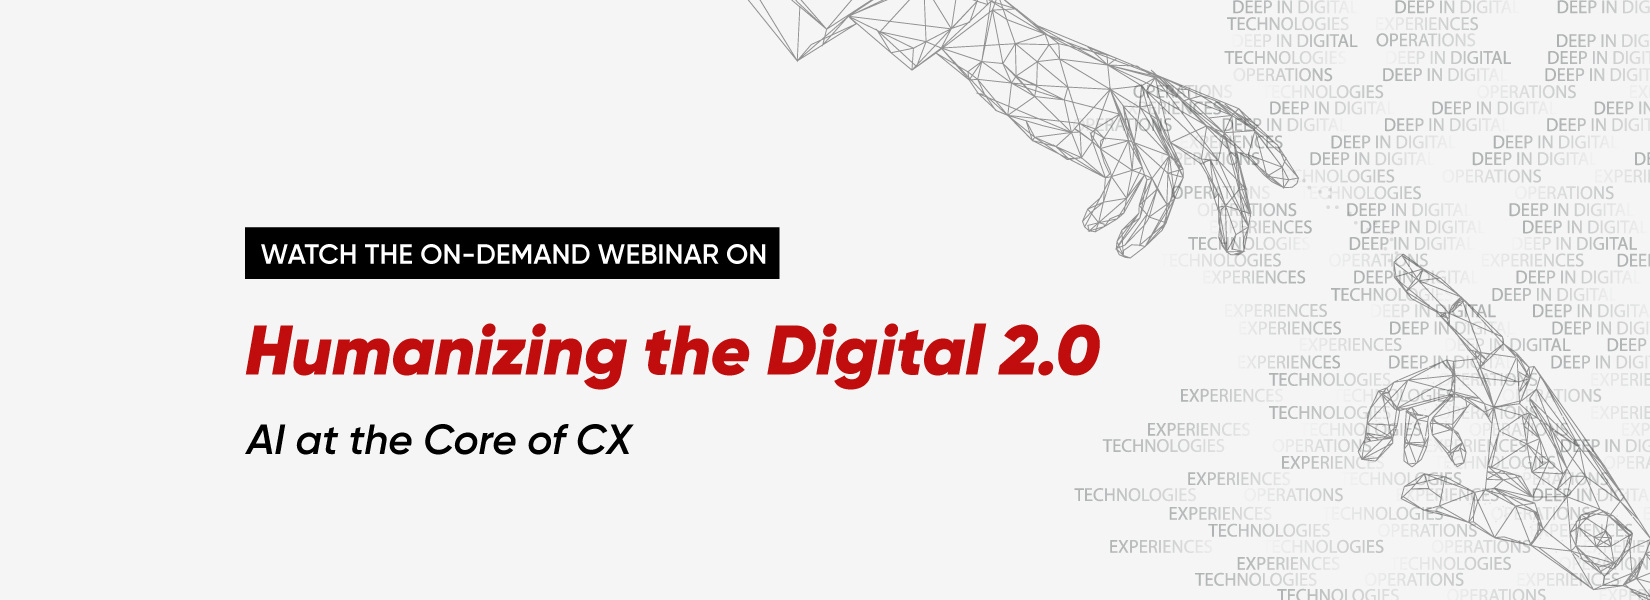 WATCH-THE-ON-DEMAND-WEBINAR-ON-Humanizing-the-Digital-of-CX-2